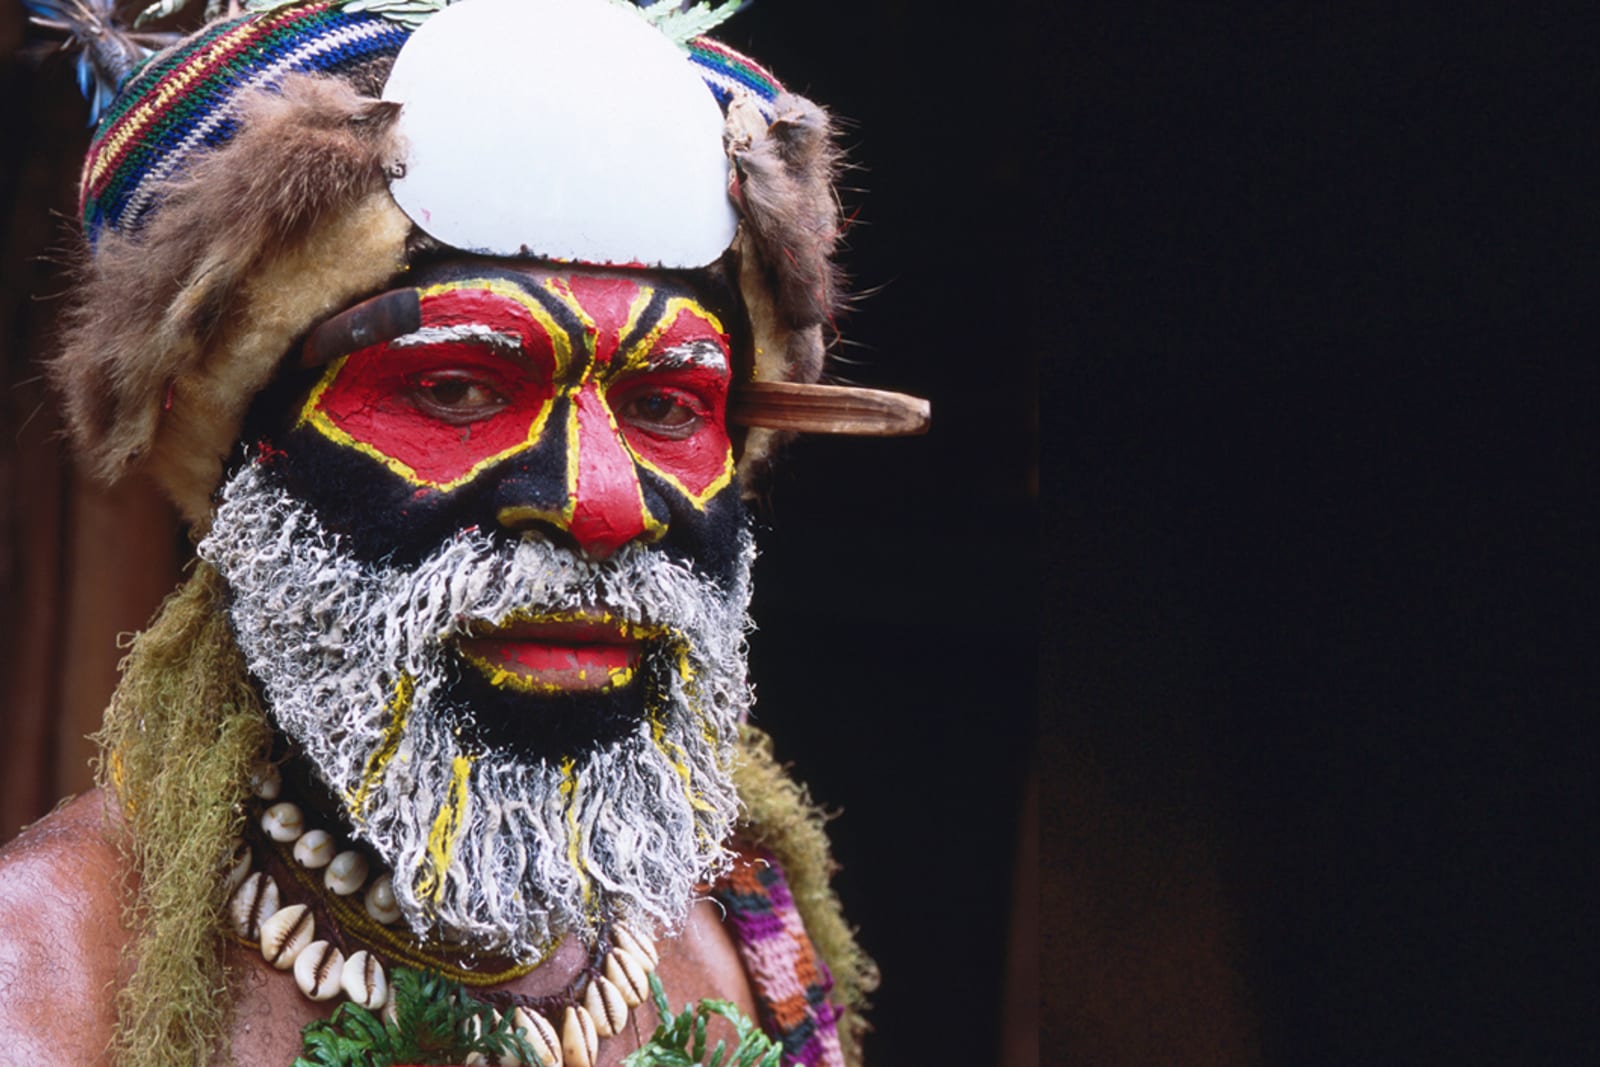 A tribe member at the Mount Hagen Cultural Show in Papua New Guinea